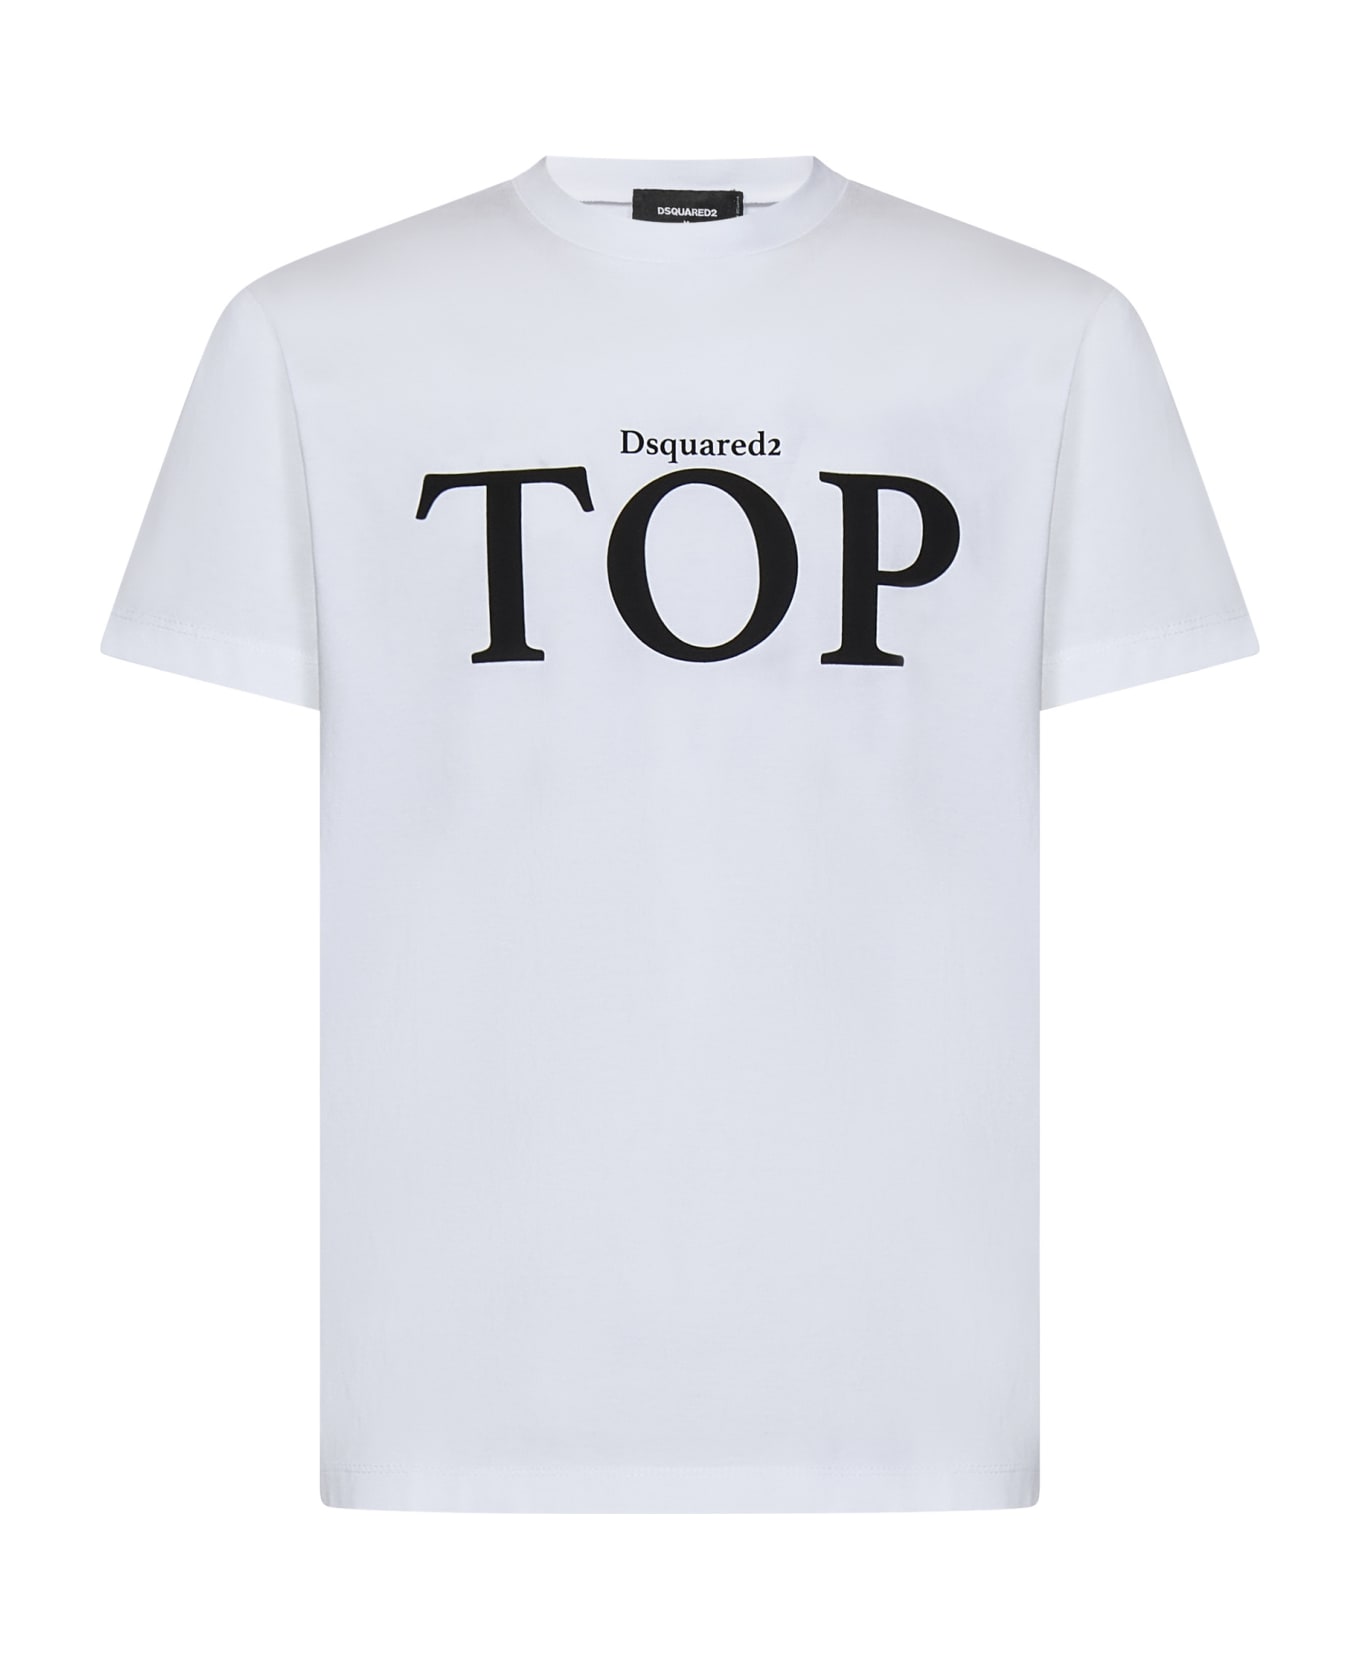 Dsquared2 Top Cool Fit T-shirt - White